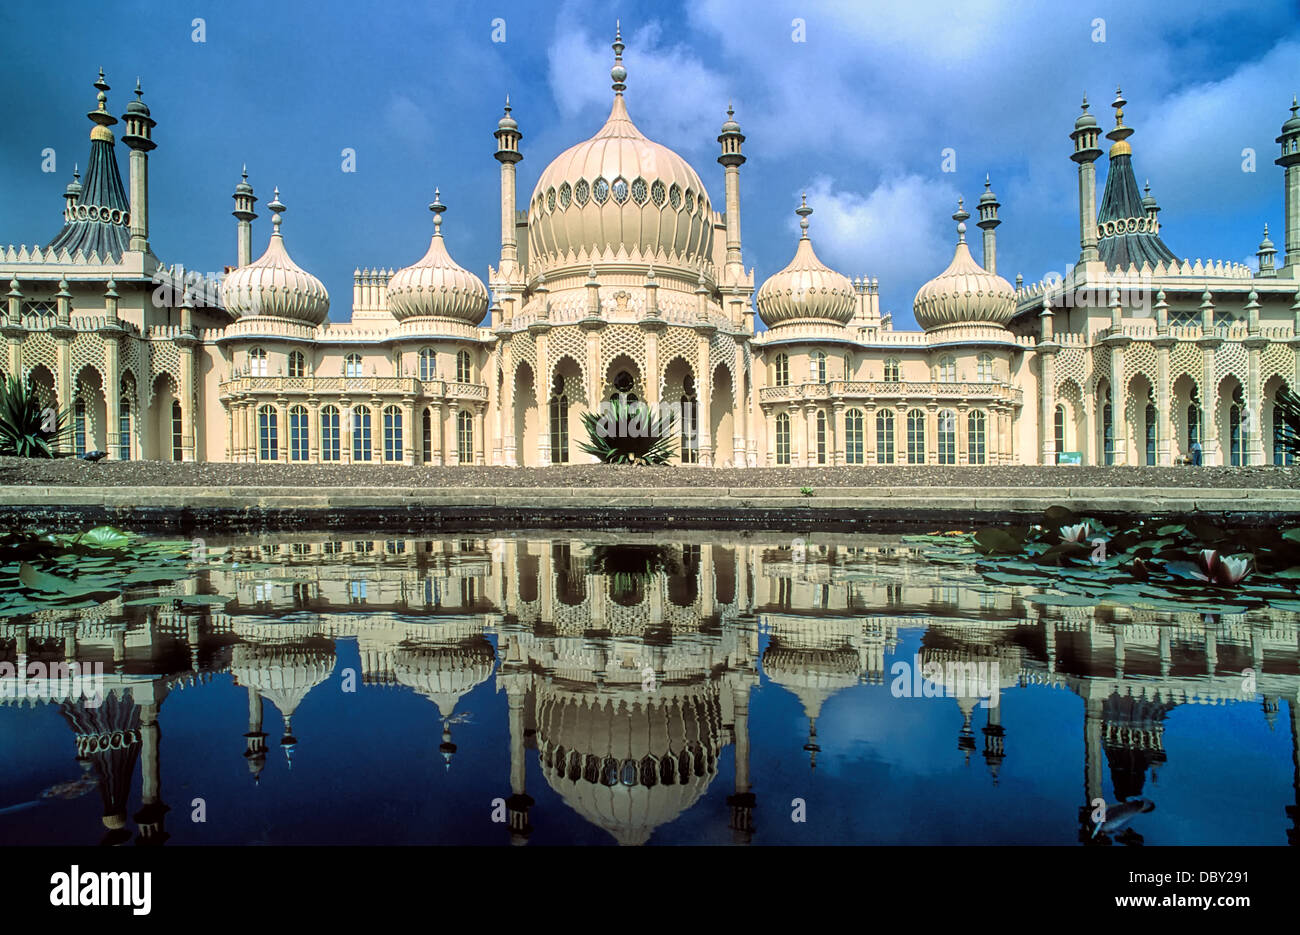 The Royal Pavilion is a former royal residence located in Brighton, England, United Kingdom. It was built by John Nash. Stock Photo